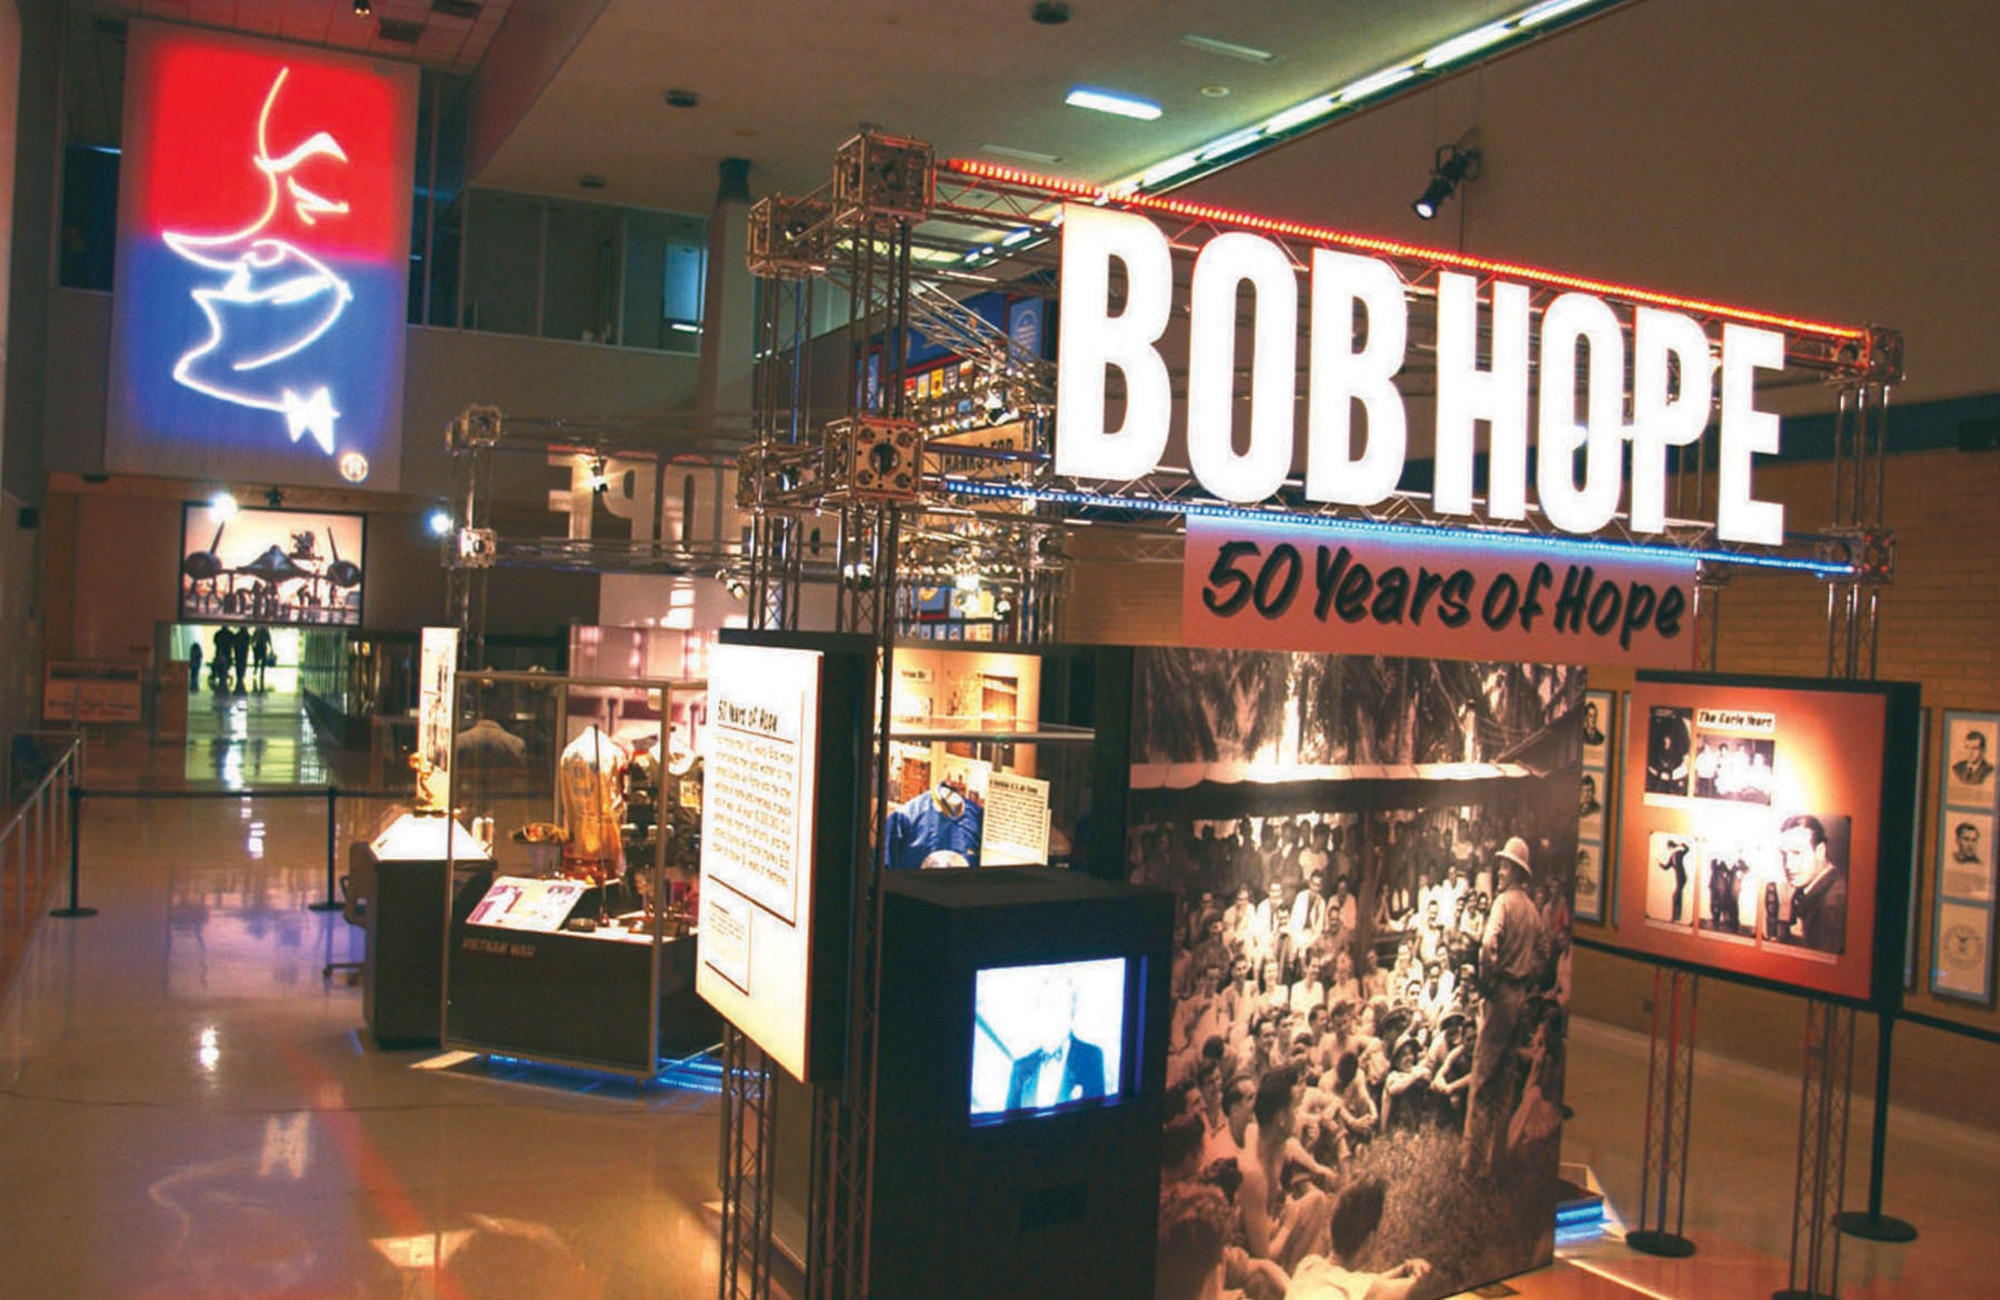 DAYTON, Ohio -- An exhibit honoring comedian Bob Hope is on display in Kettering Hall at the National Museum of the United States Air Force. (U.S. Air Force photo)